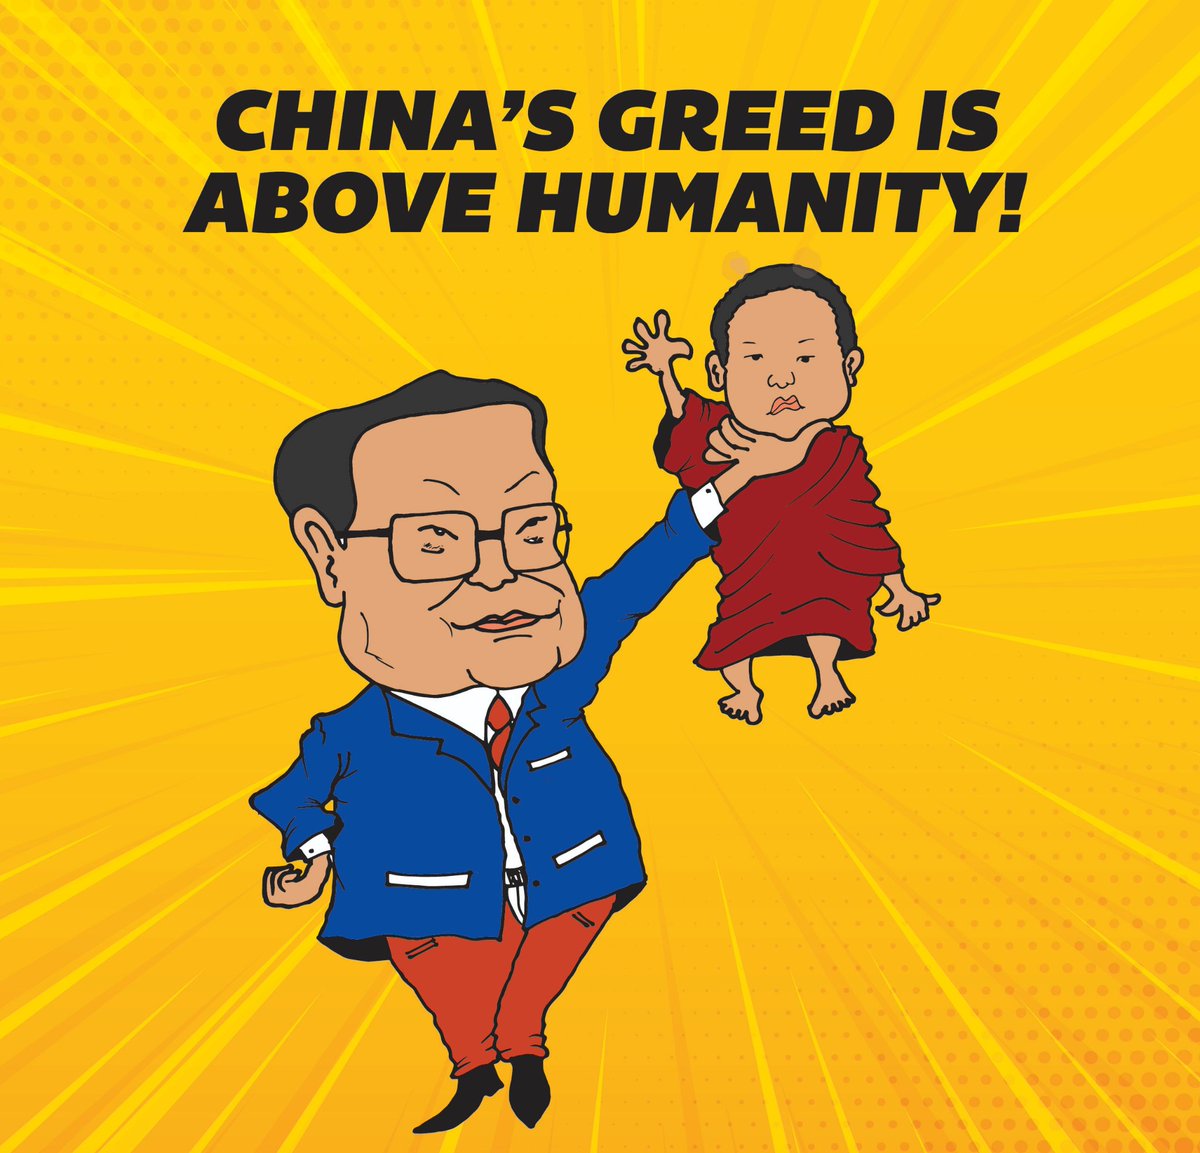 #CCPChina replaced the true reincarnation of #PanchenLama #GedhunChoekyiNyima with their stooge, Gyaltsen Norbu and managed to establish its hegemony on Buddhism too.
#StopChina Now!
@SFTHQ 
@KenRoth